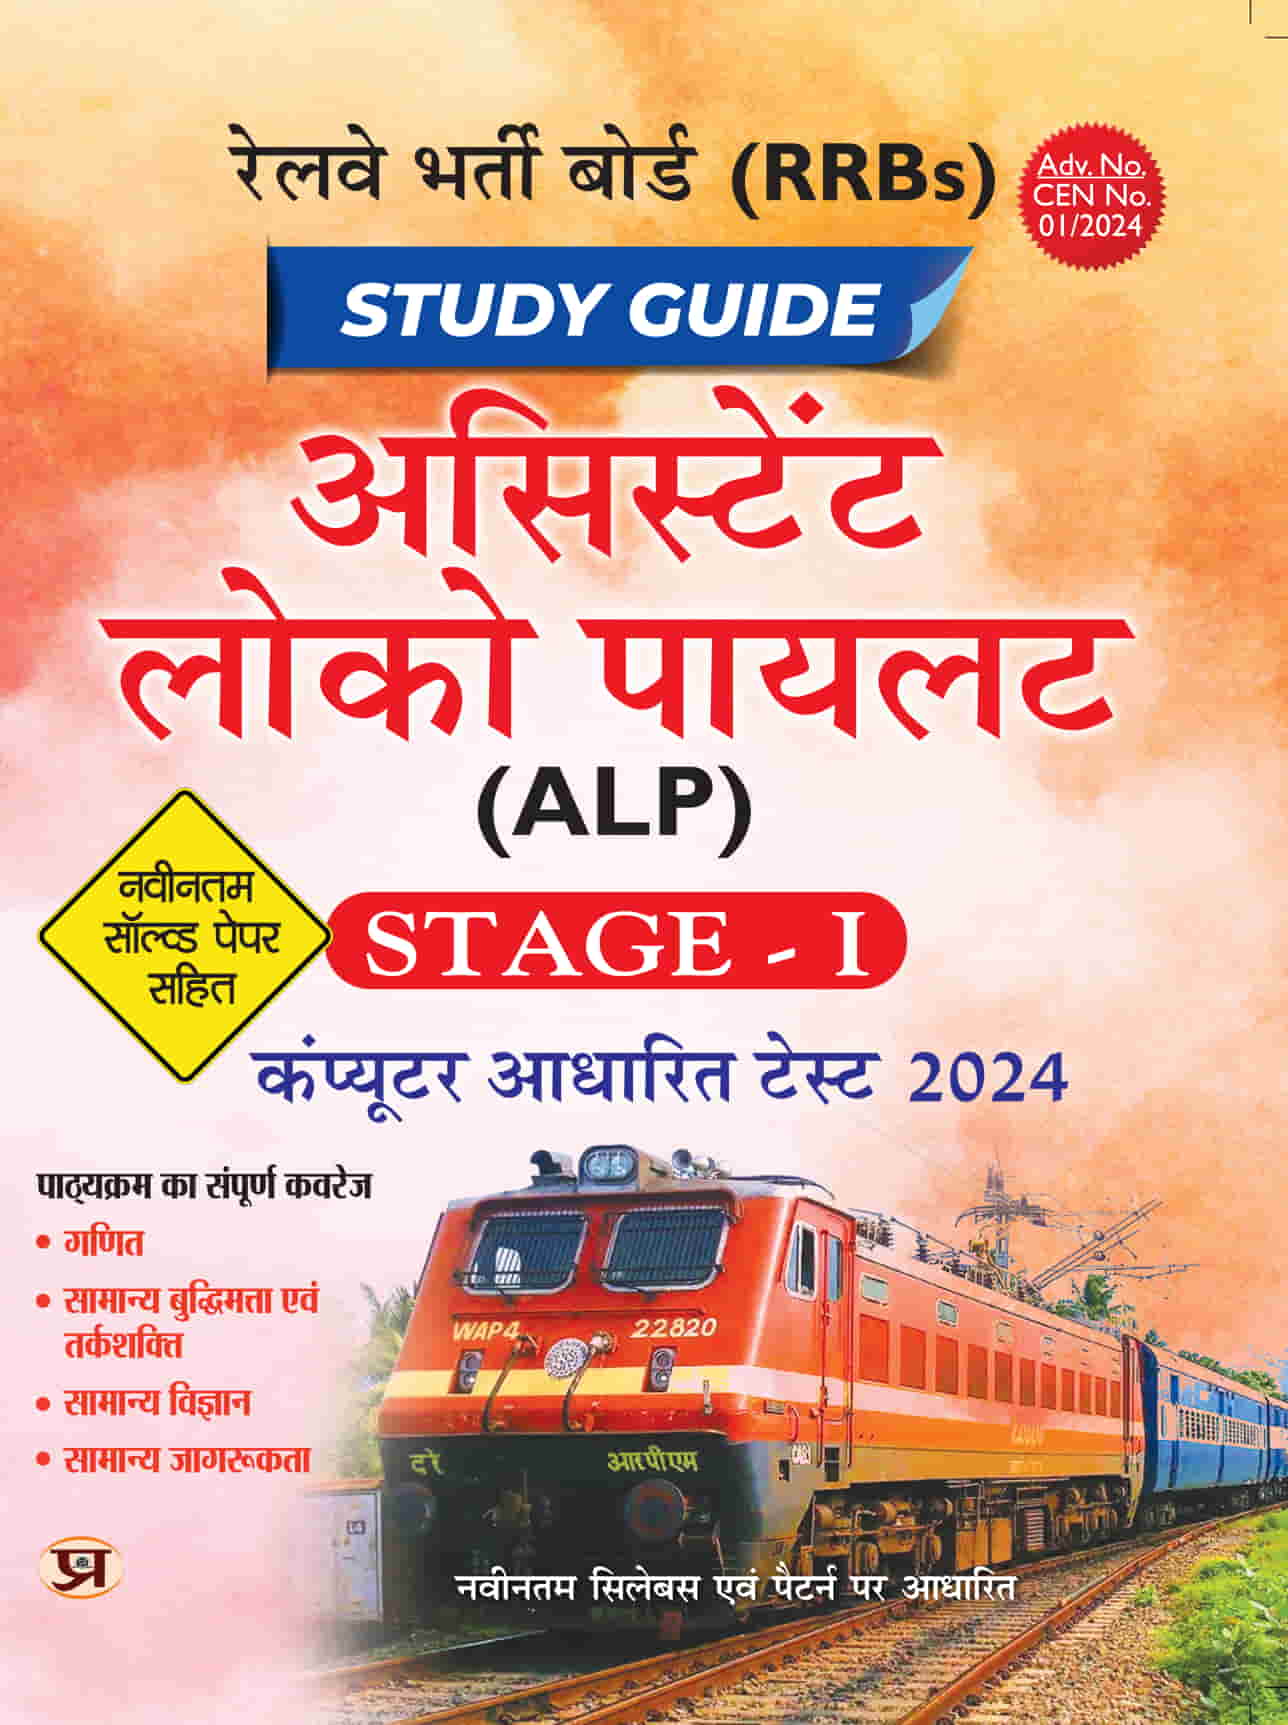 RRBs: Railway Assistant Loco Pilot (ALP) Study Guide 2024, Stage - 1 |... 